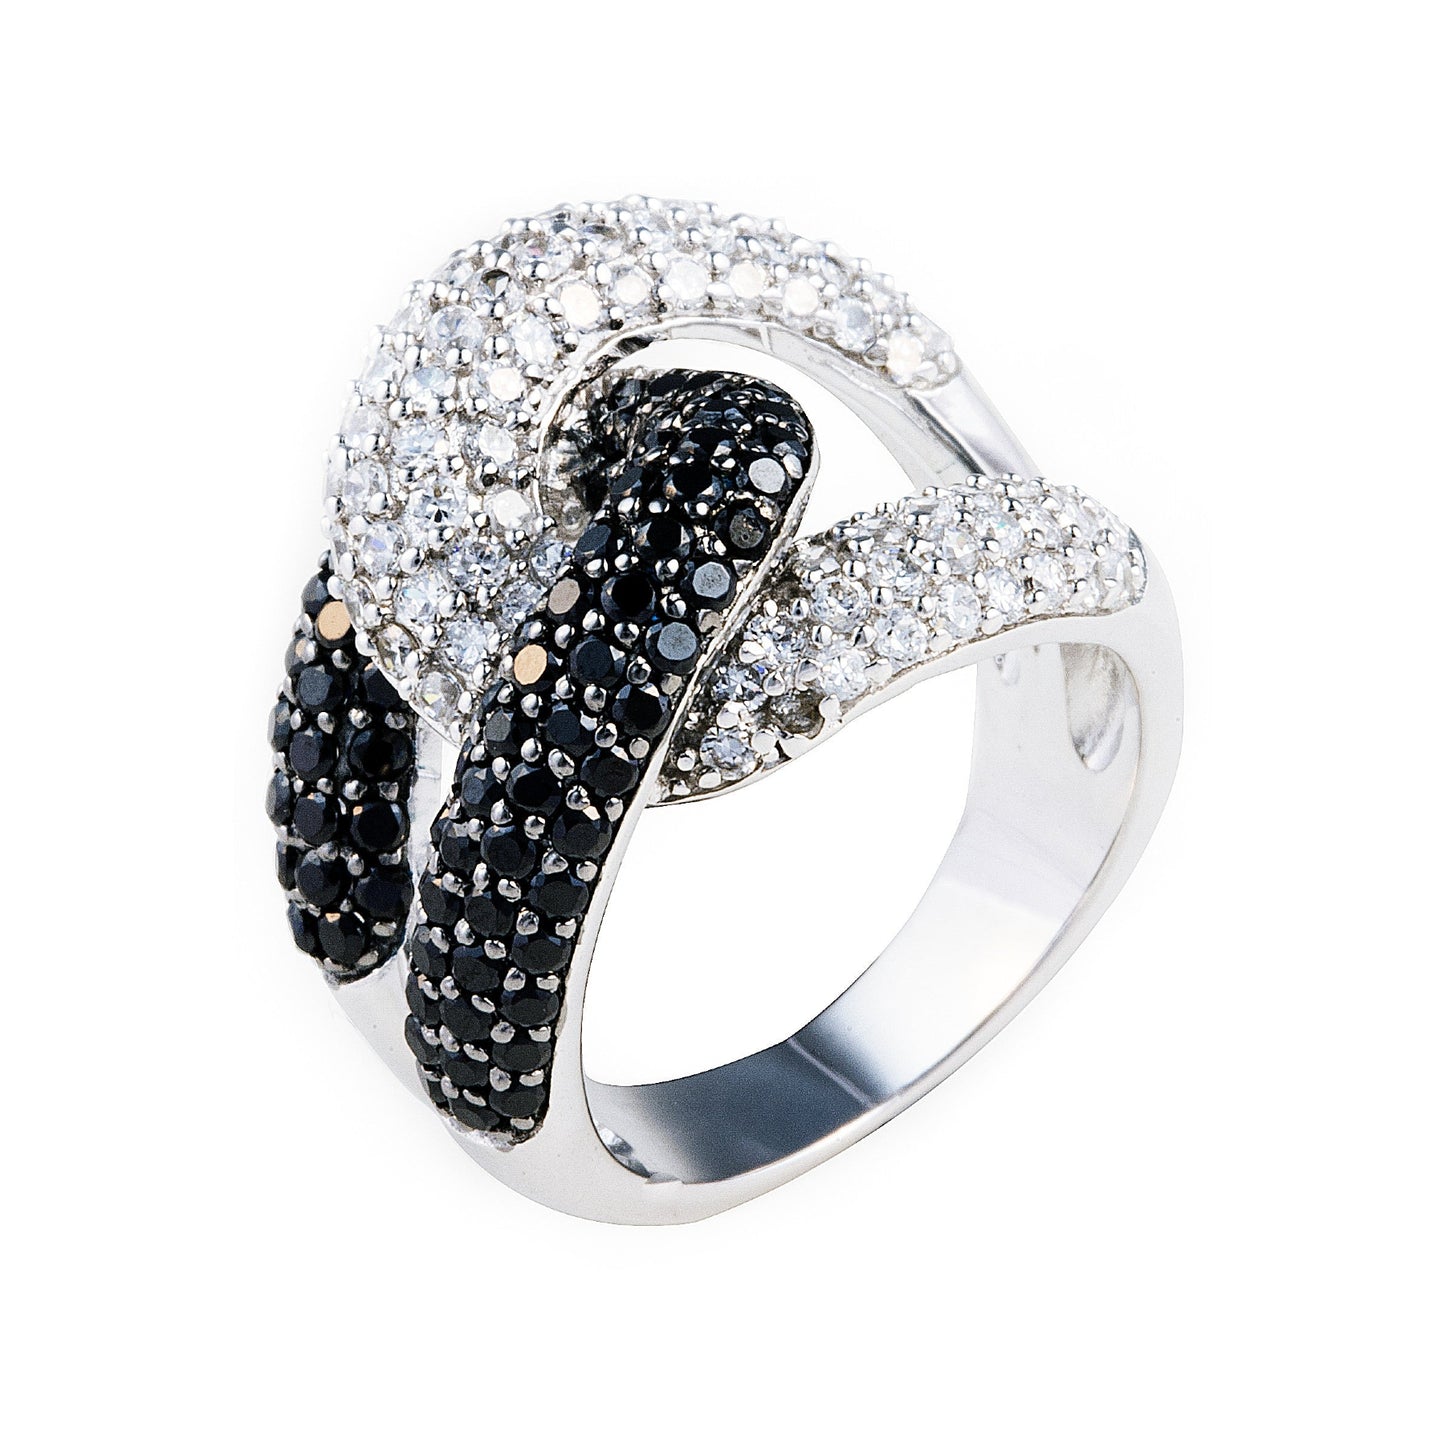 White Night Coco Ring is made of 925 sterling silver and features midnight black cubic zirconia stones entwined with clear/white cubic zirconia stones. Luxury jewellery by Bellagio & Co. Worldwide shipping